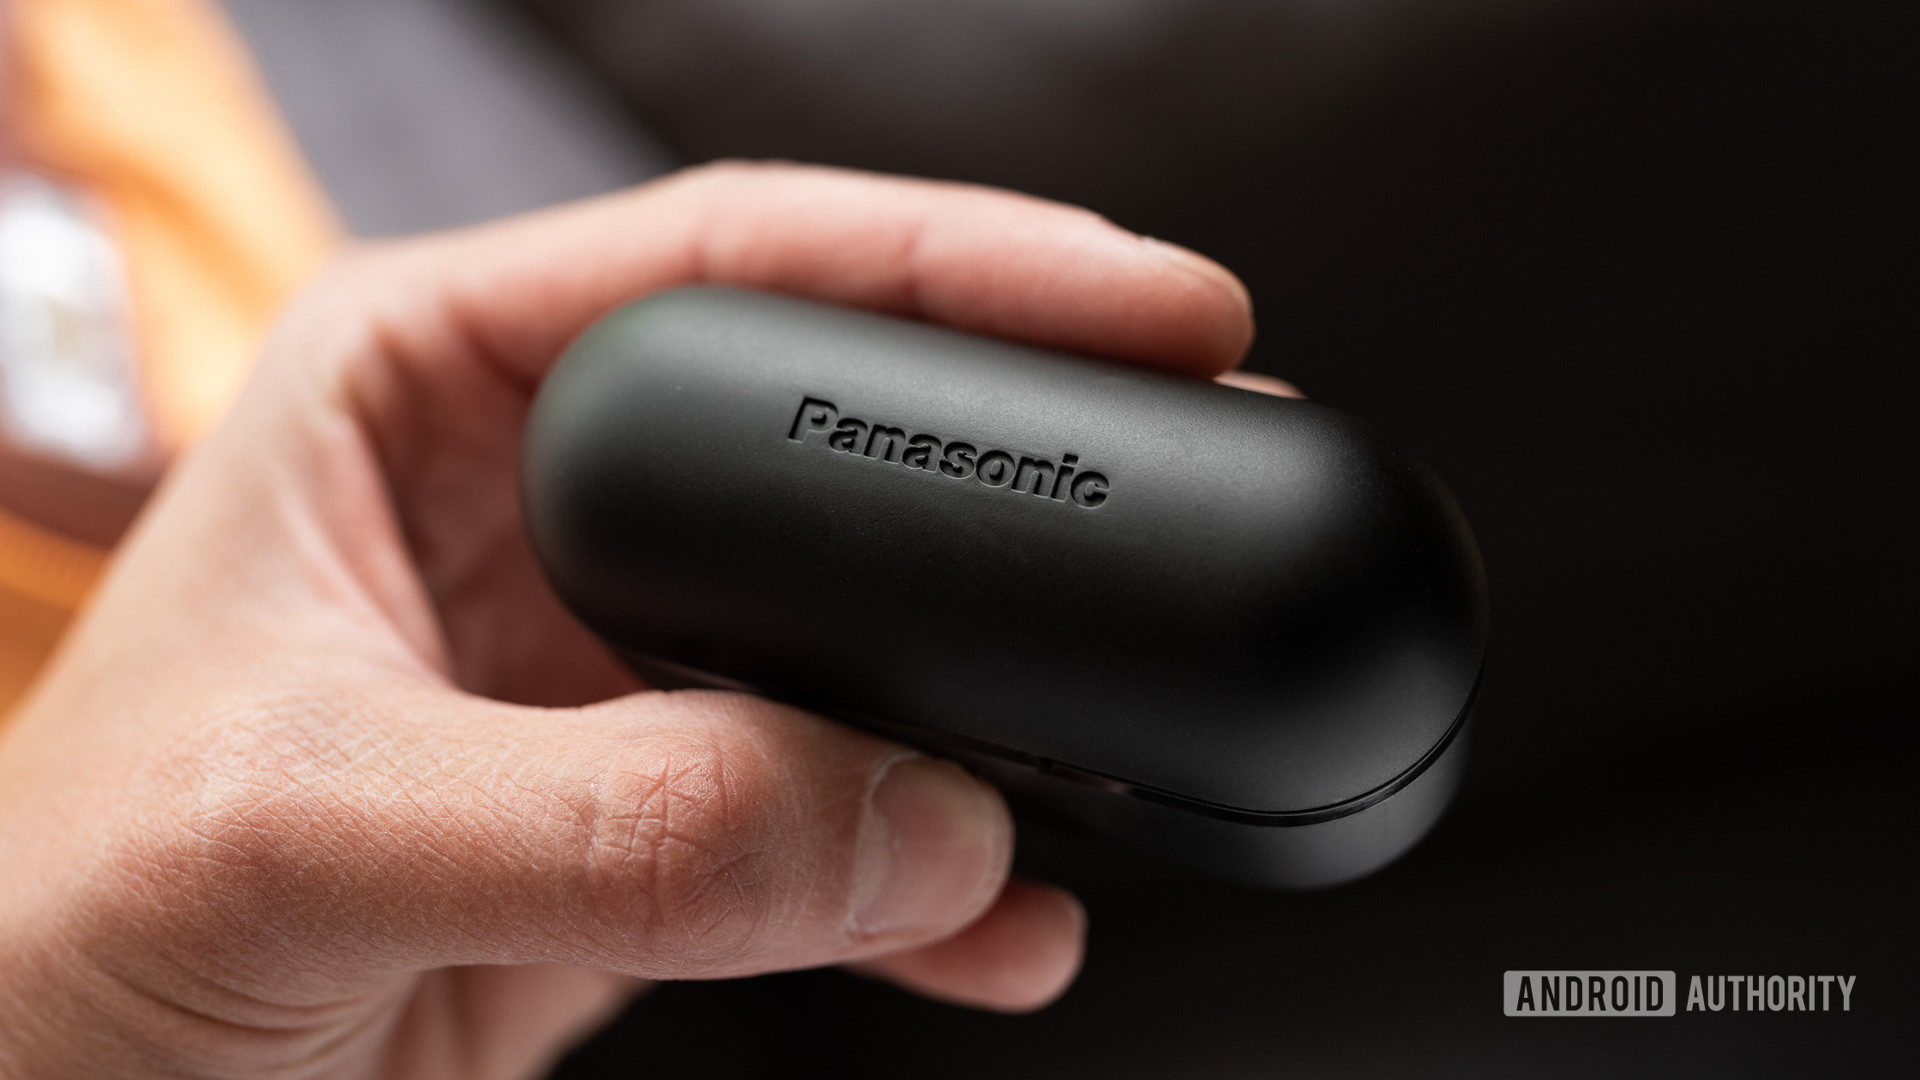 A picture of the Panasonic RZ-S500W noise cancelling earbuds case shut with the Panasonic logo in view.